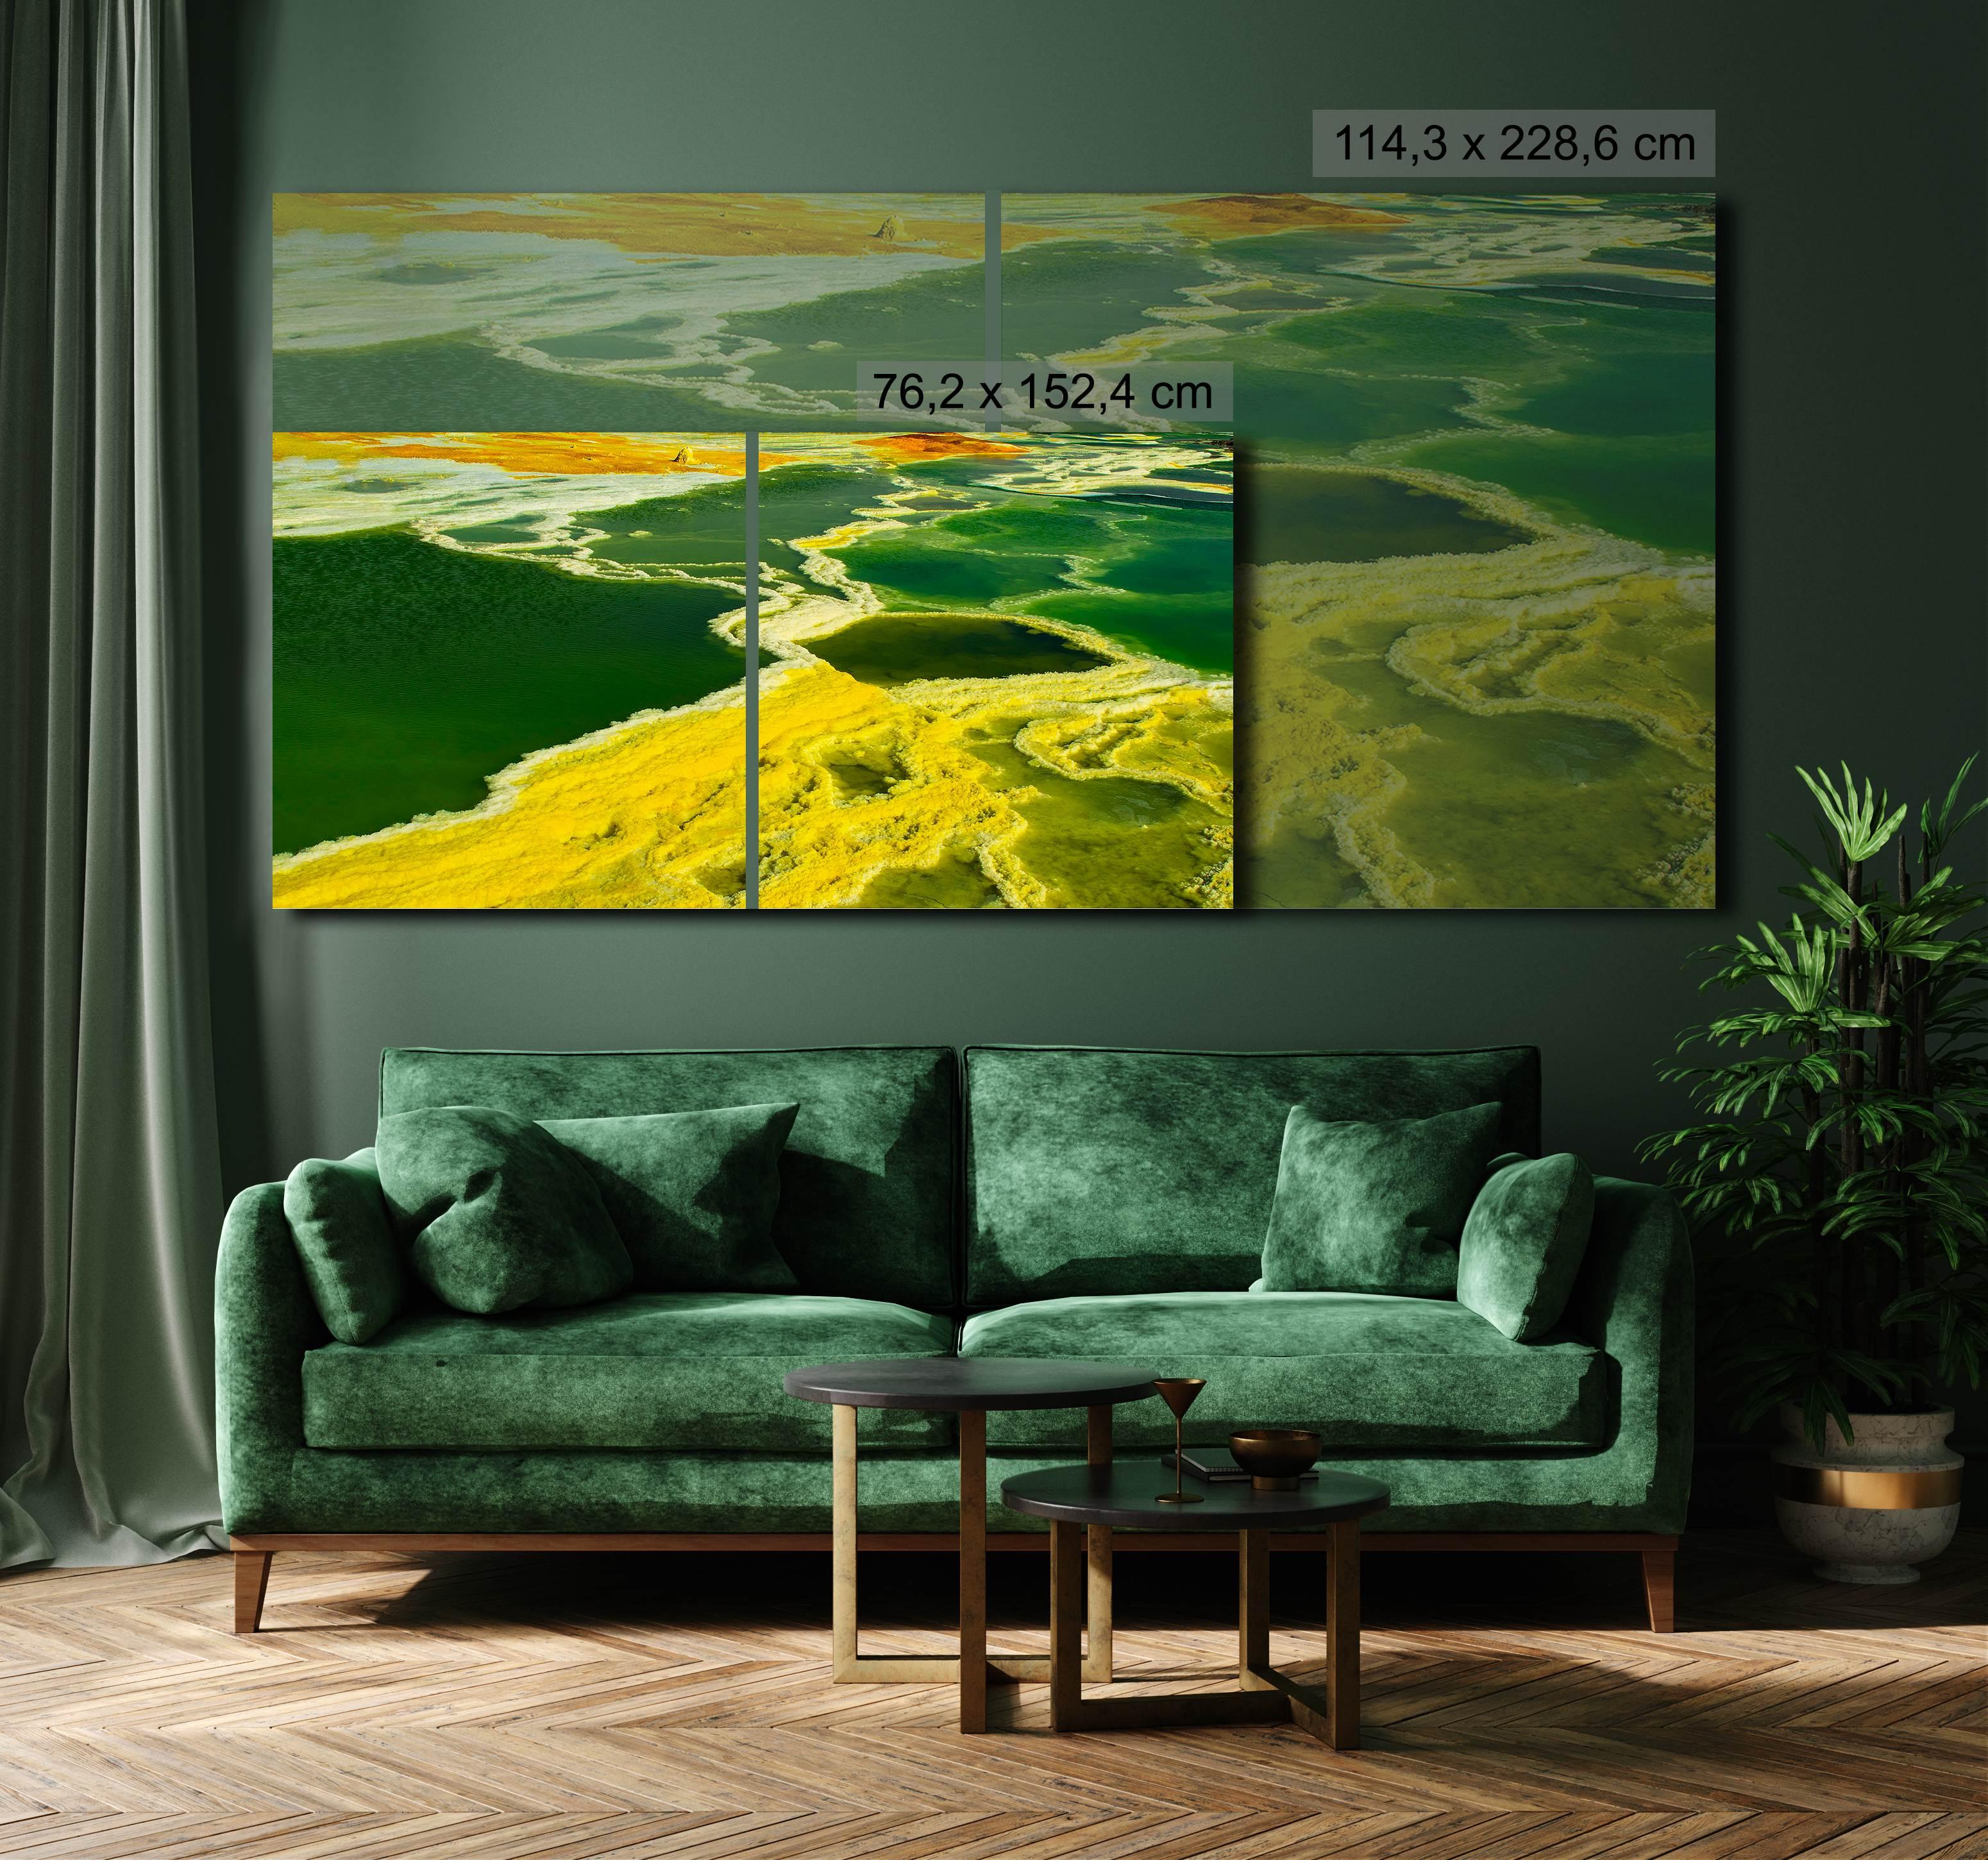 Afar I by Luca Marziale - Landscape fine art photography, nature, yellow For Sale 1